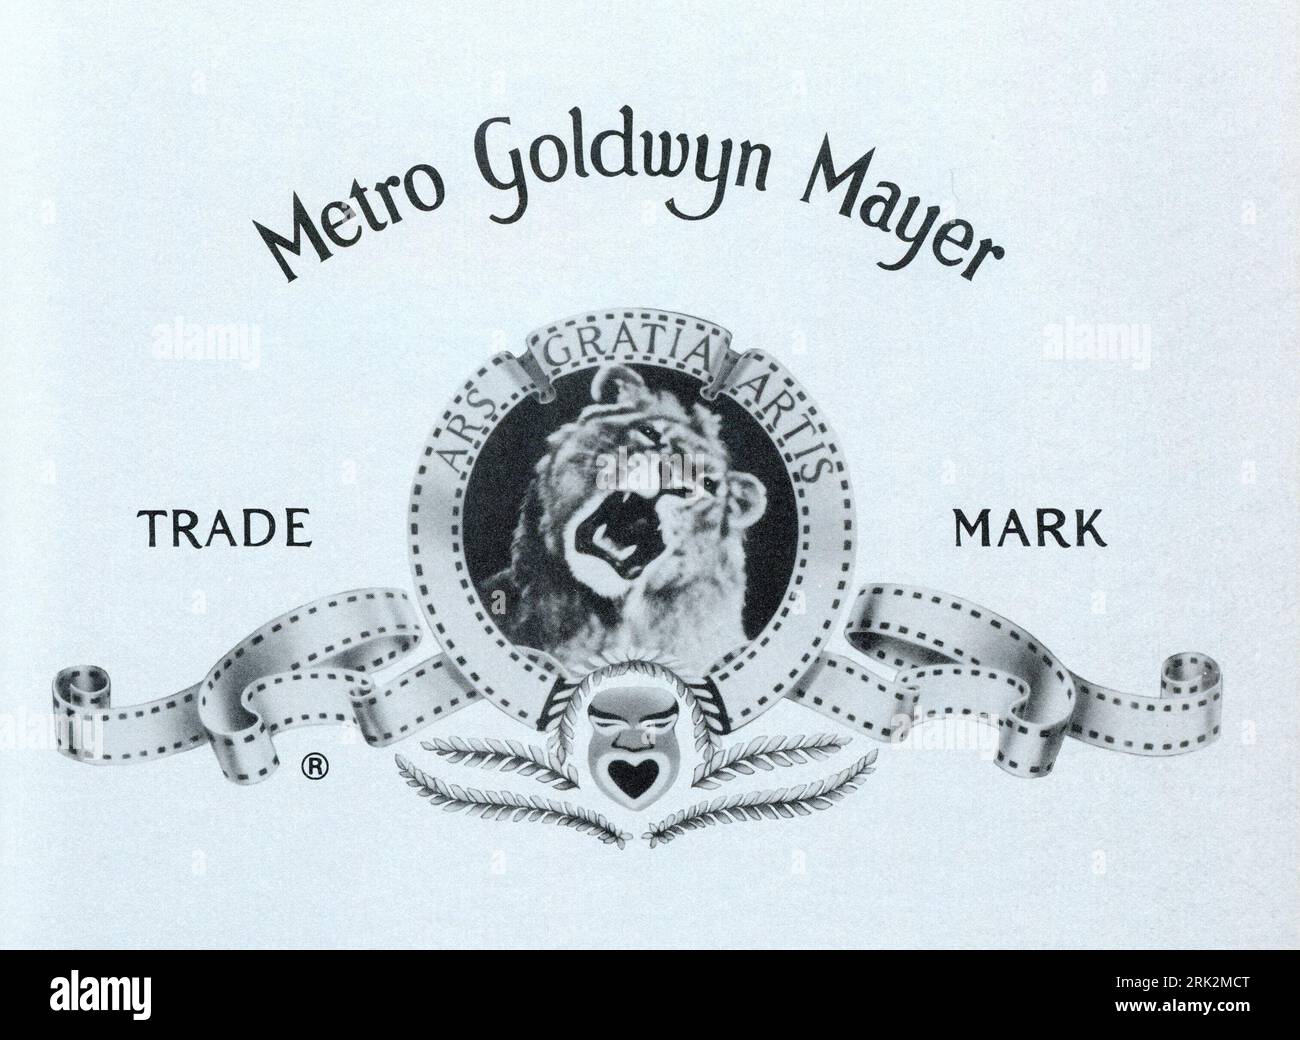 METRO GOLDWYN MAYER / MGM Logo from ad in Brochure for The Royal Film Performance 1981 at the Odeon Leicester Square on Monday 30th March of BEN CROSS IAN CHARLESON in CHARIOTS OF FIRE 1981 director HUGH HUDSON writer Colin Welland music Vangelis producer David Puttnam executive producers Jake Eberts and Dodi Fayed Enigma Productions / Allied Stars Ltd. / Twentieth Century Fox Film Company Stock Photo